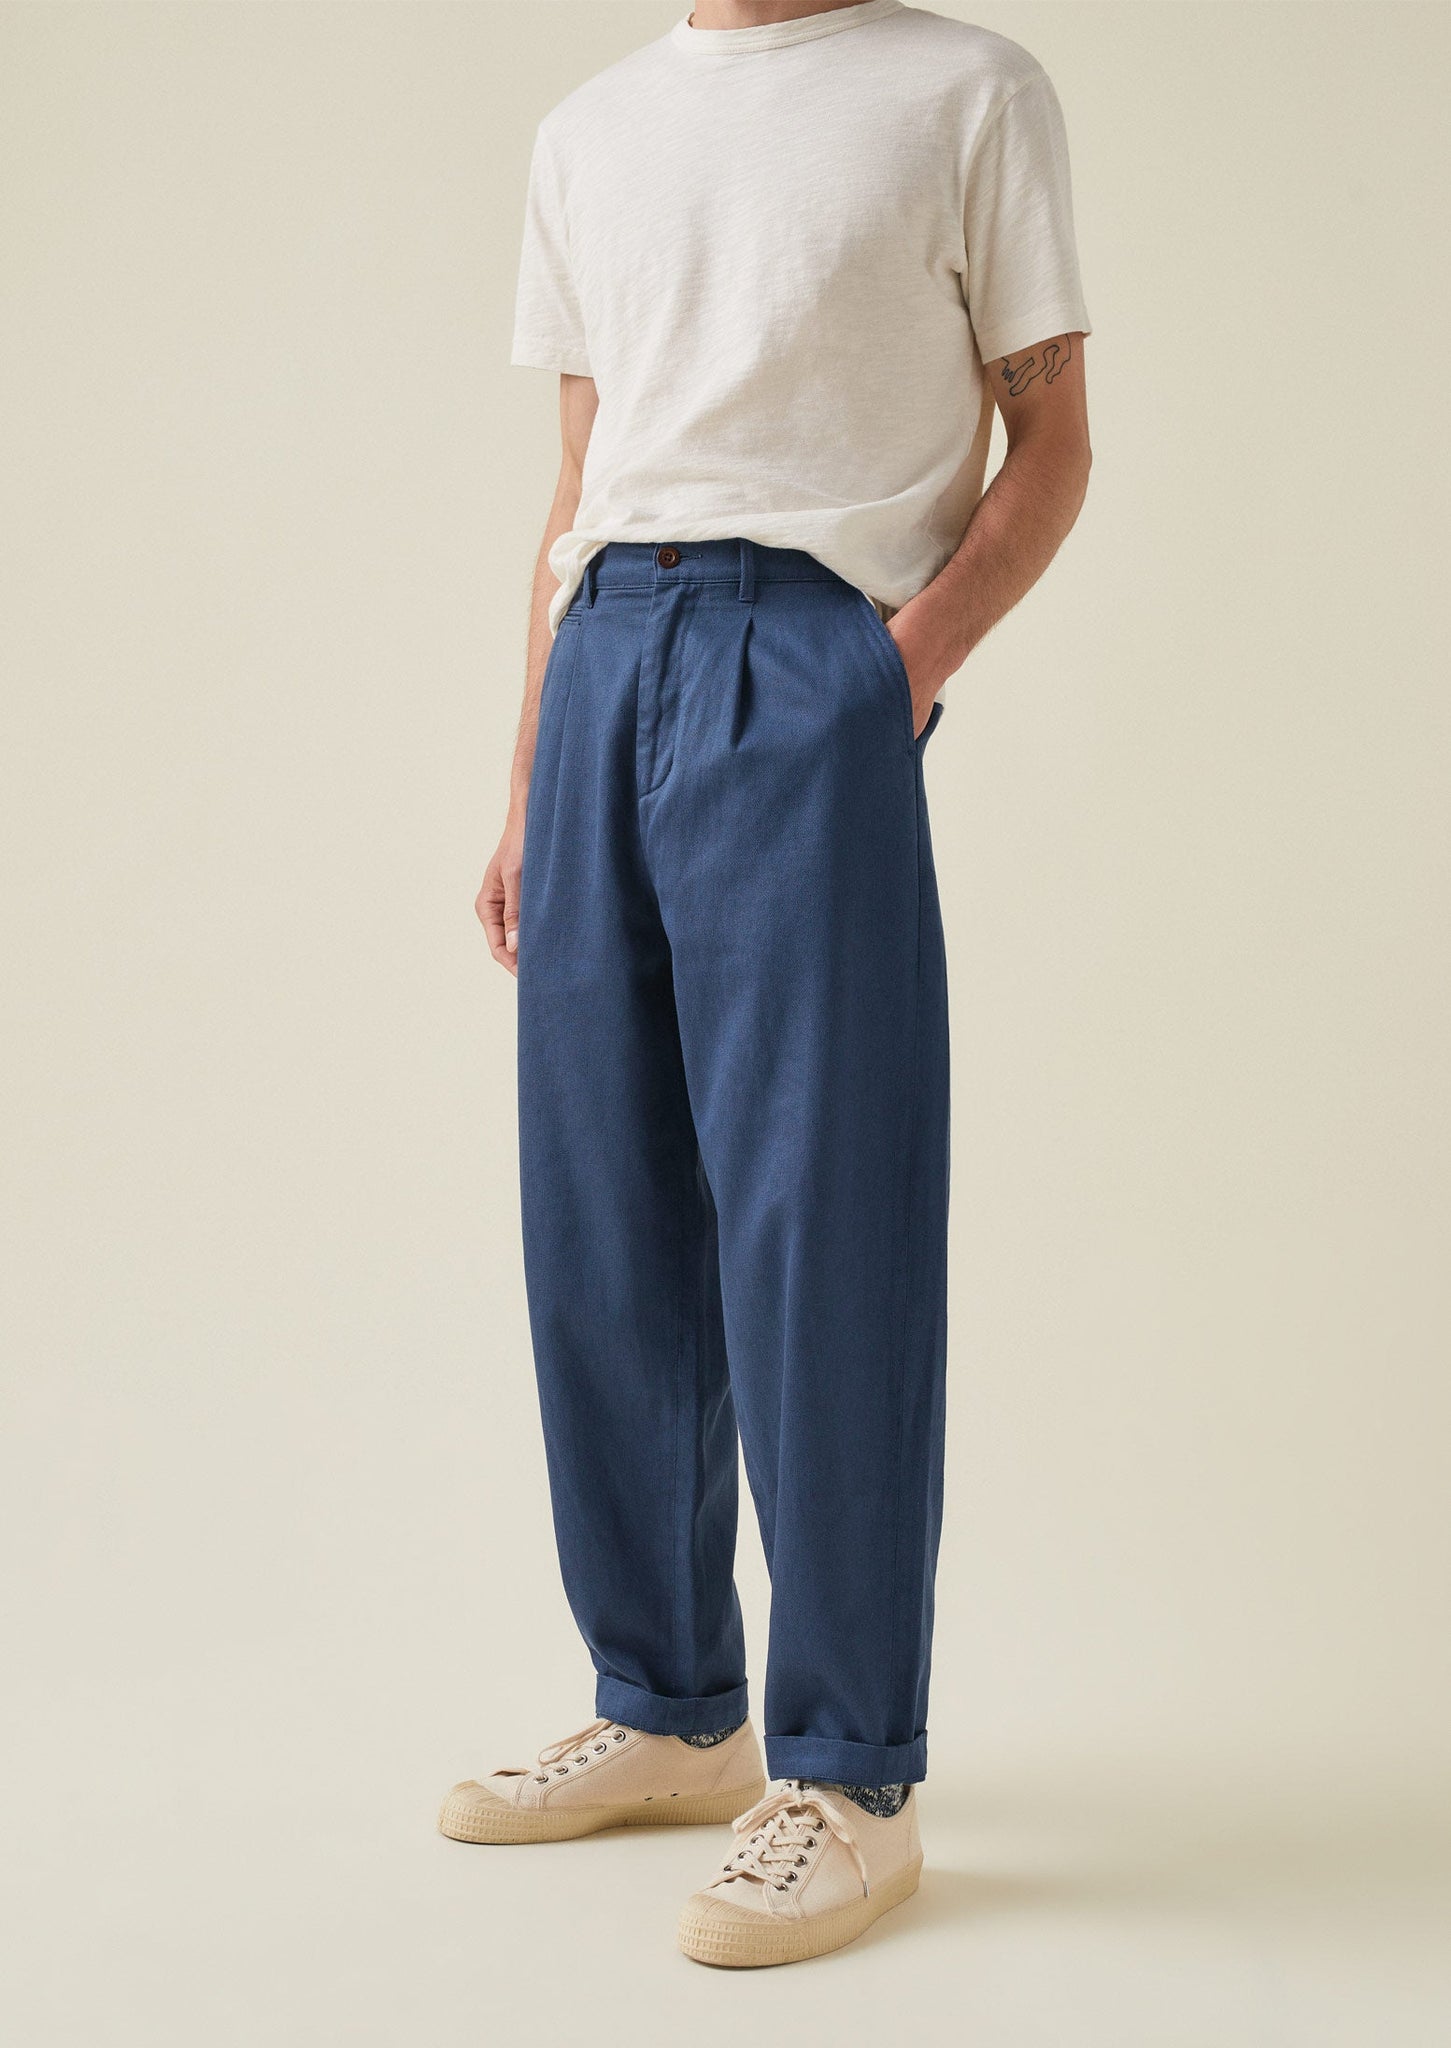 Duncan Exaggerated Tapered Pants | Delft Blue